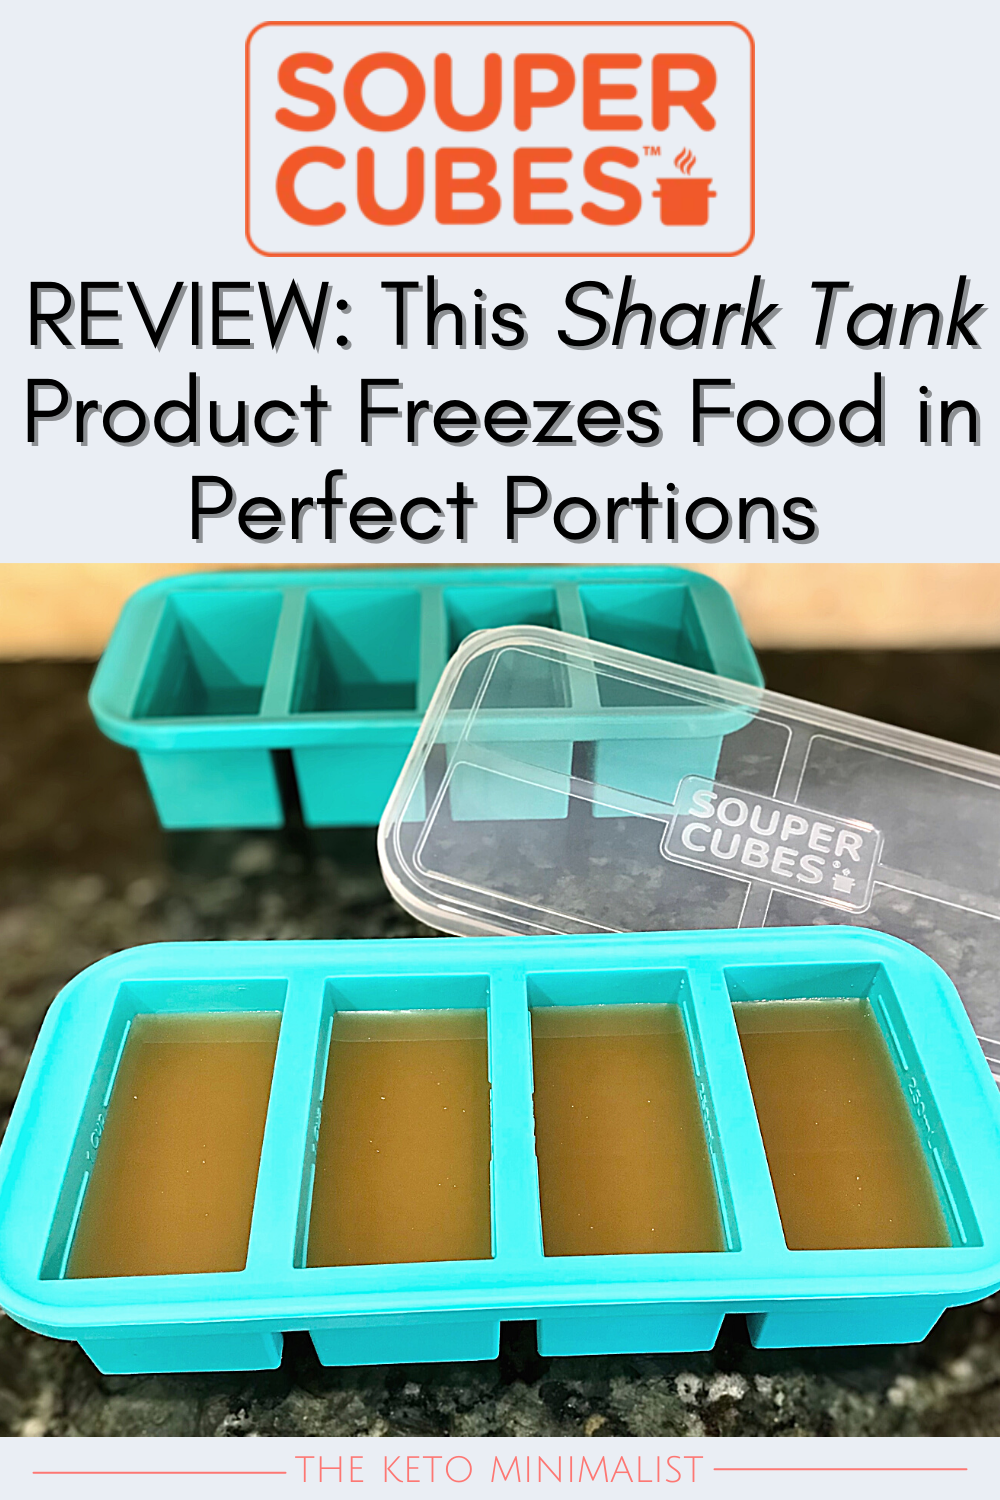 Souper Cubes - 🦈 We are super excited to announce that Souper Cubes will  be on #SharkTank on February 19! 😃🎉 We can't wait for the episode to air!  Don't ask if